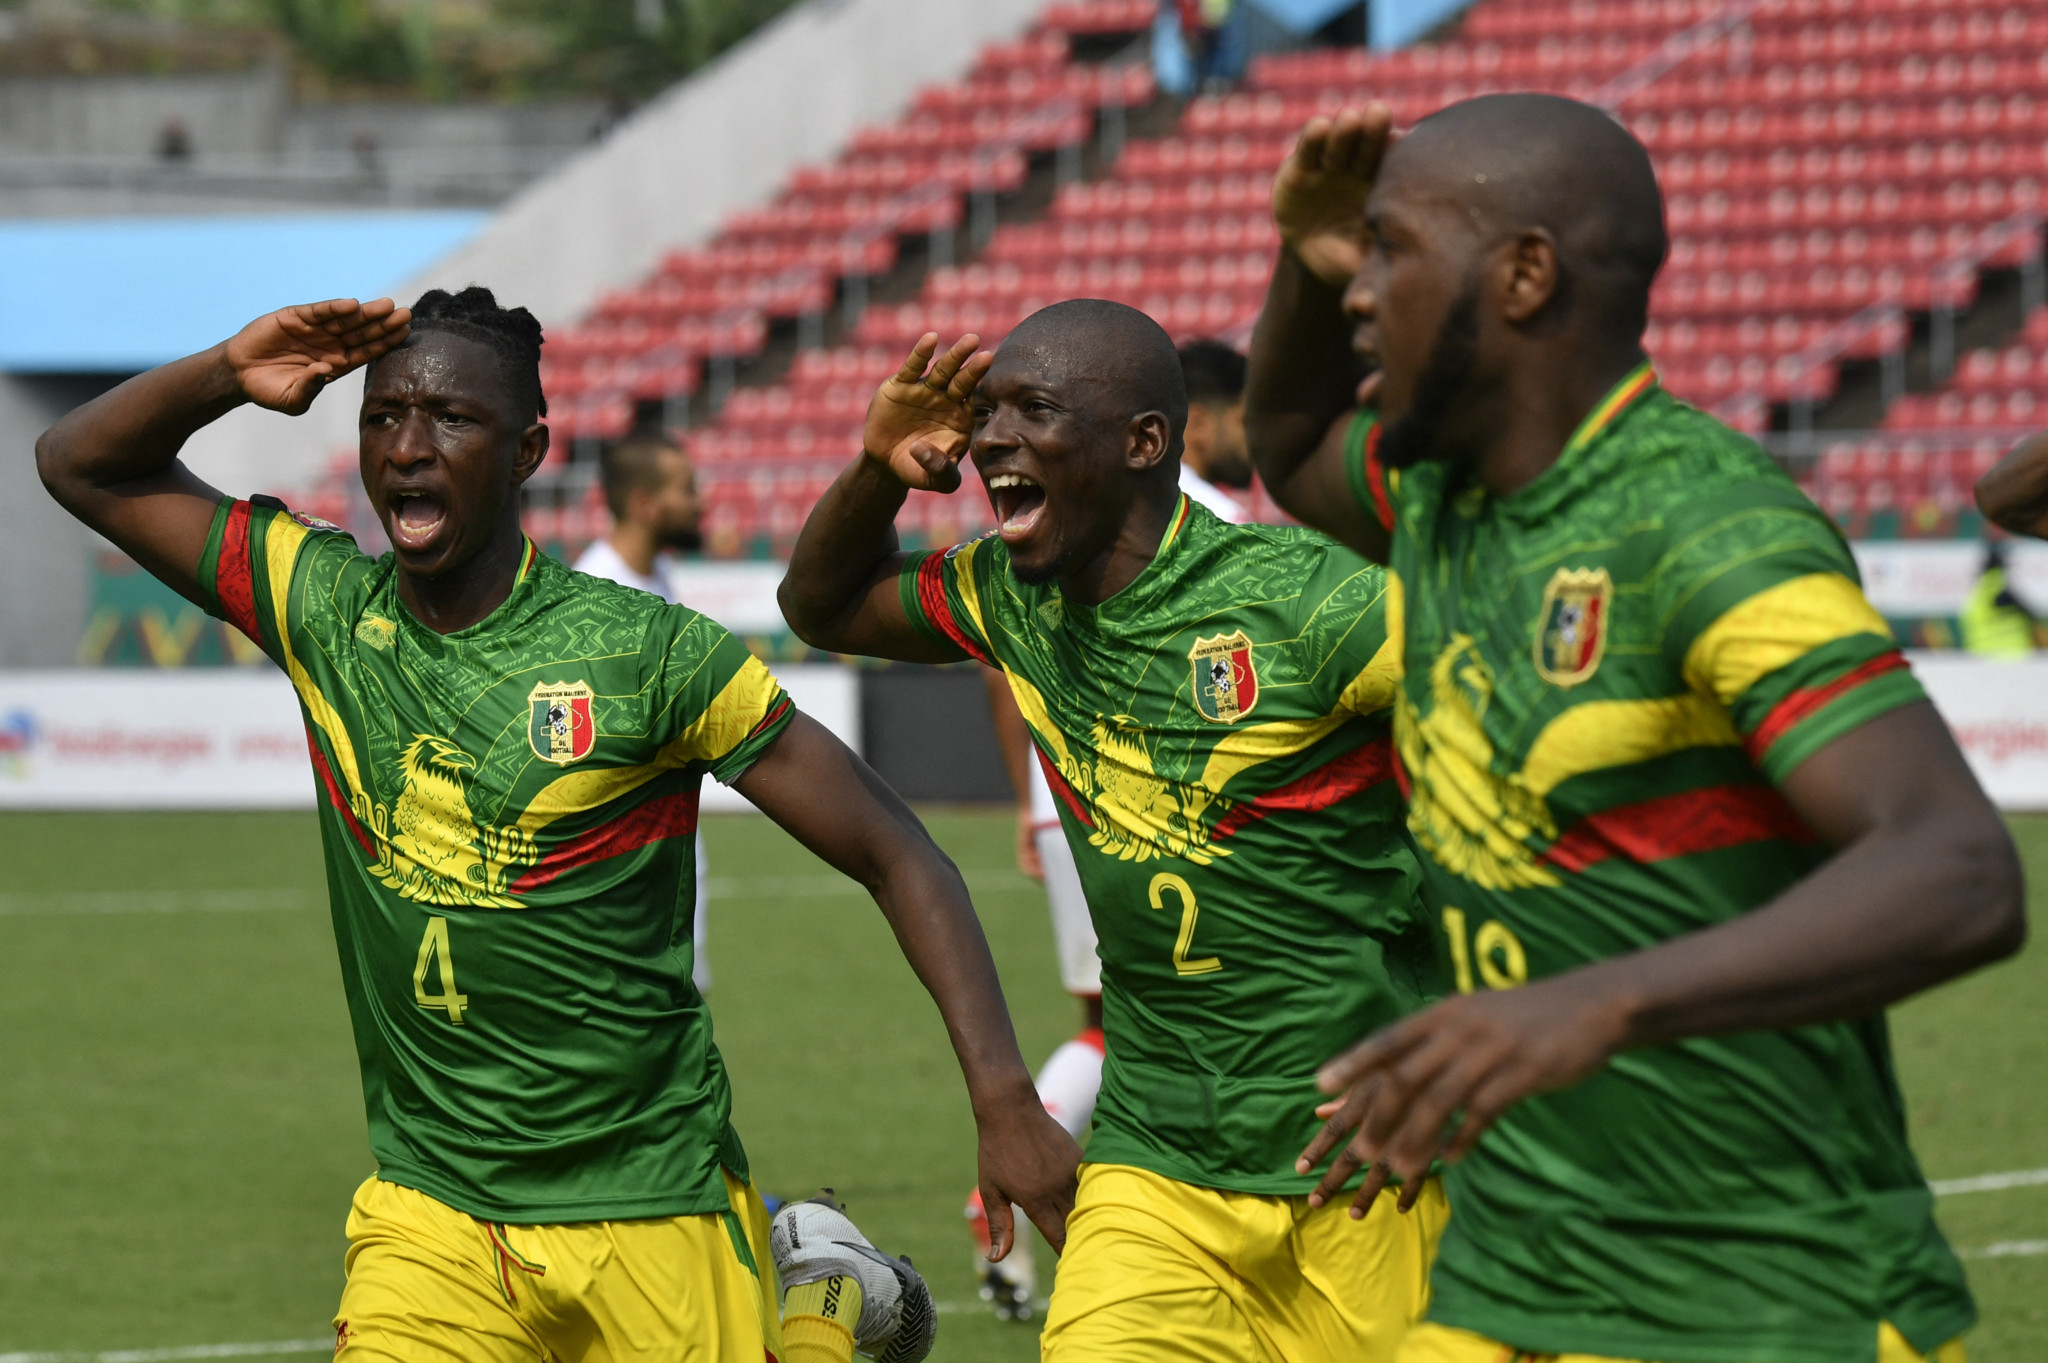 Mali victorious in baffling Africa Cup of Nations match against Tunisia